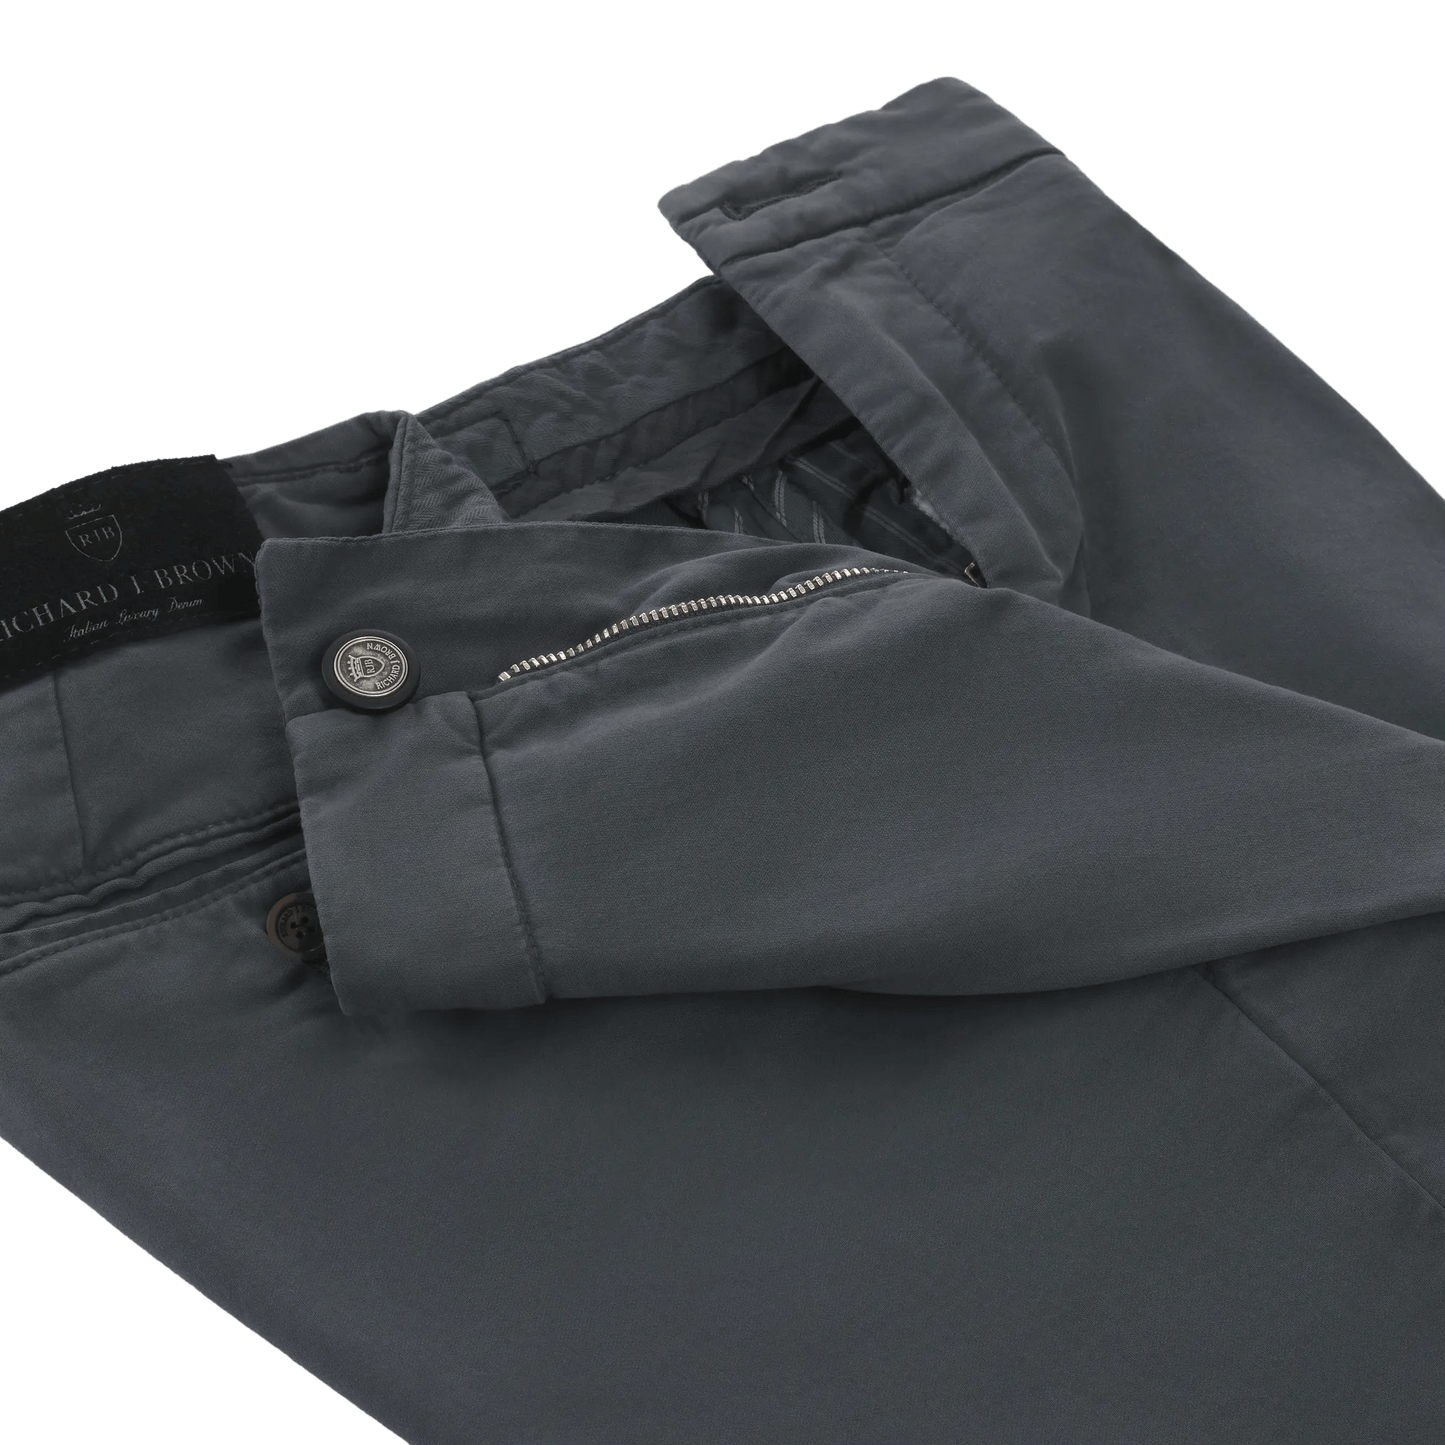 Richard J. Brown Slim - Fit Stretch - Cotton Trousers with Buckle Adjusters in Metallic Grey - SARTALE